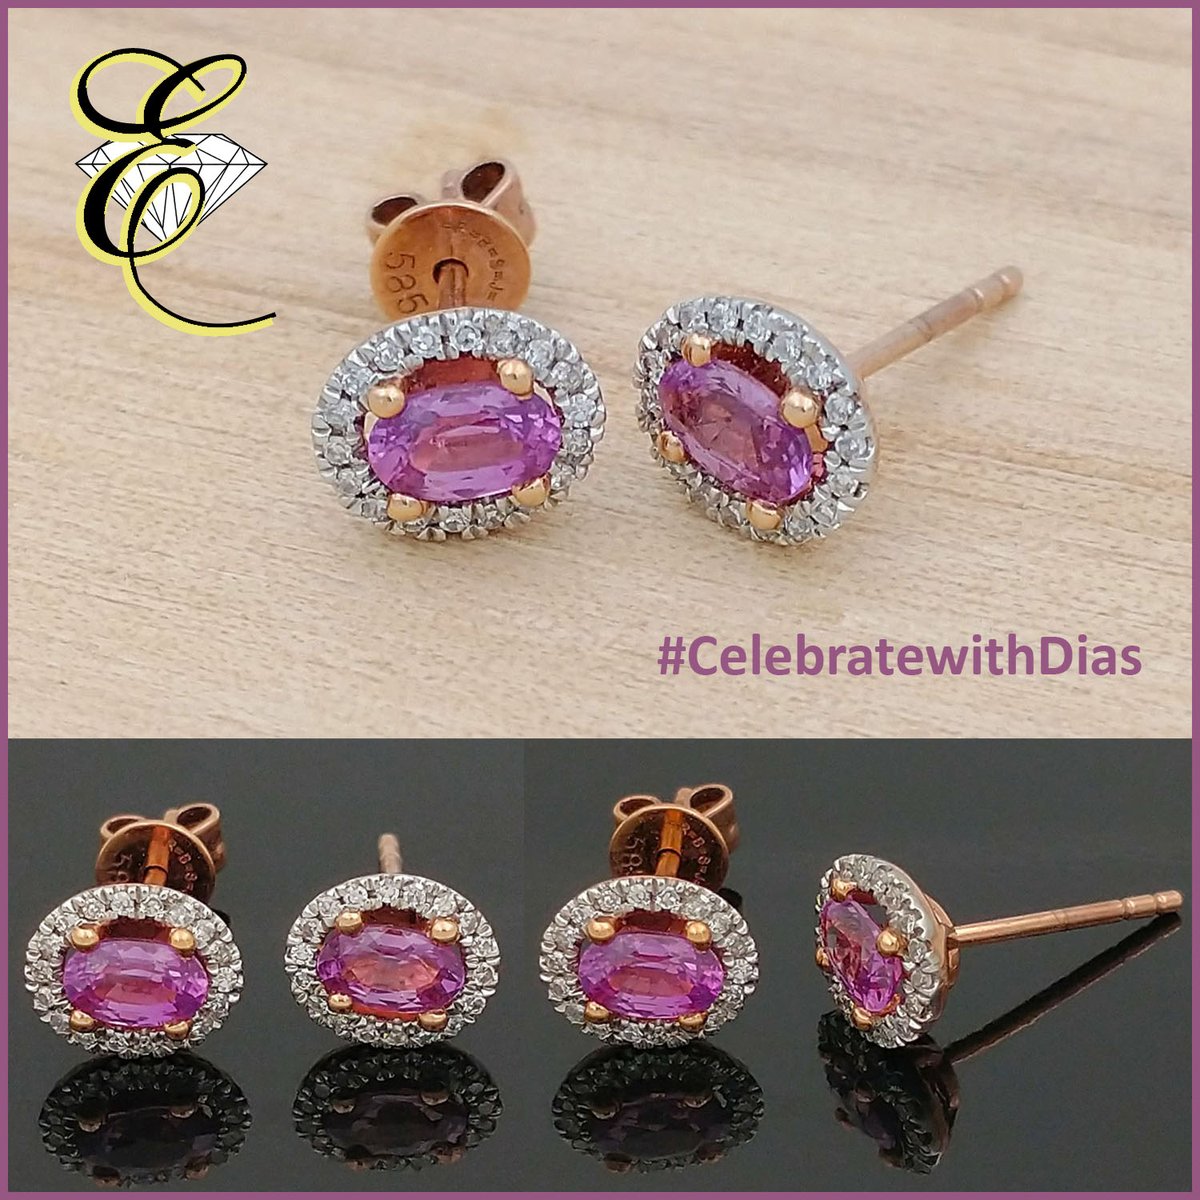 14K rose gold pair of pierced Earrings with 2 oval Pink Sapphires totaling .60 carat and 36 Diamonds, by Michael Couch $1,440. eichhornjewelry.com #start2sparkle #alwaysthinkDIAMONDS #eichhornglow #1diamondatatime #CelebratewithDias #ColorWithYourDias